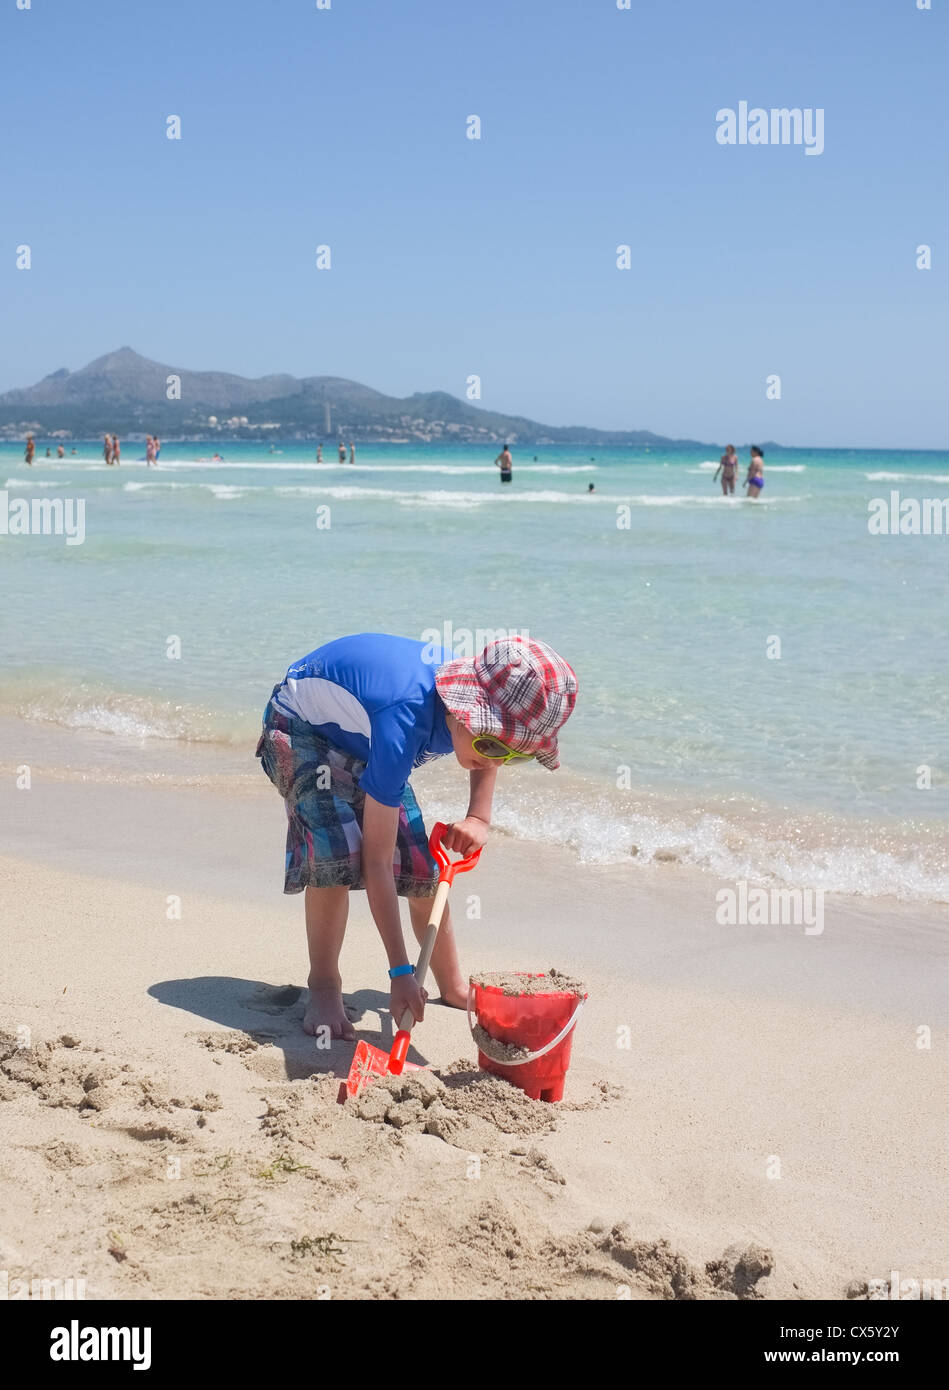 A young boy digs in the sand at alcudia beach Majorca wearing sun protection hat and vest Stock Photo